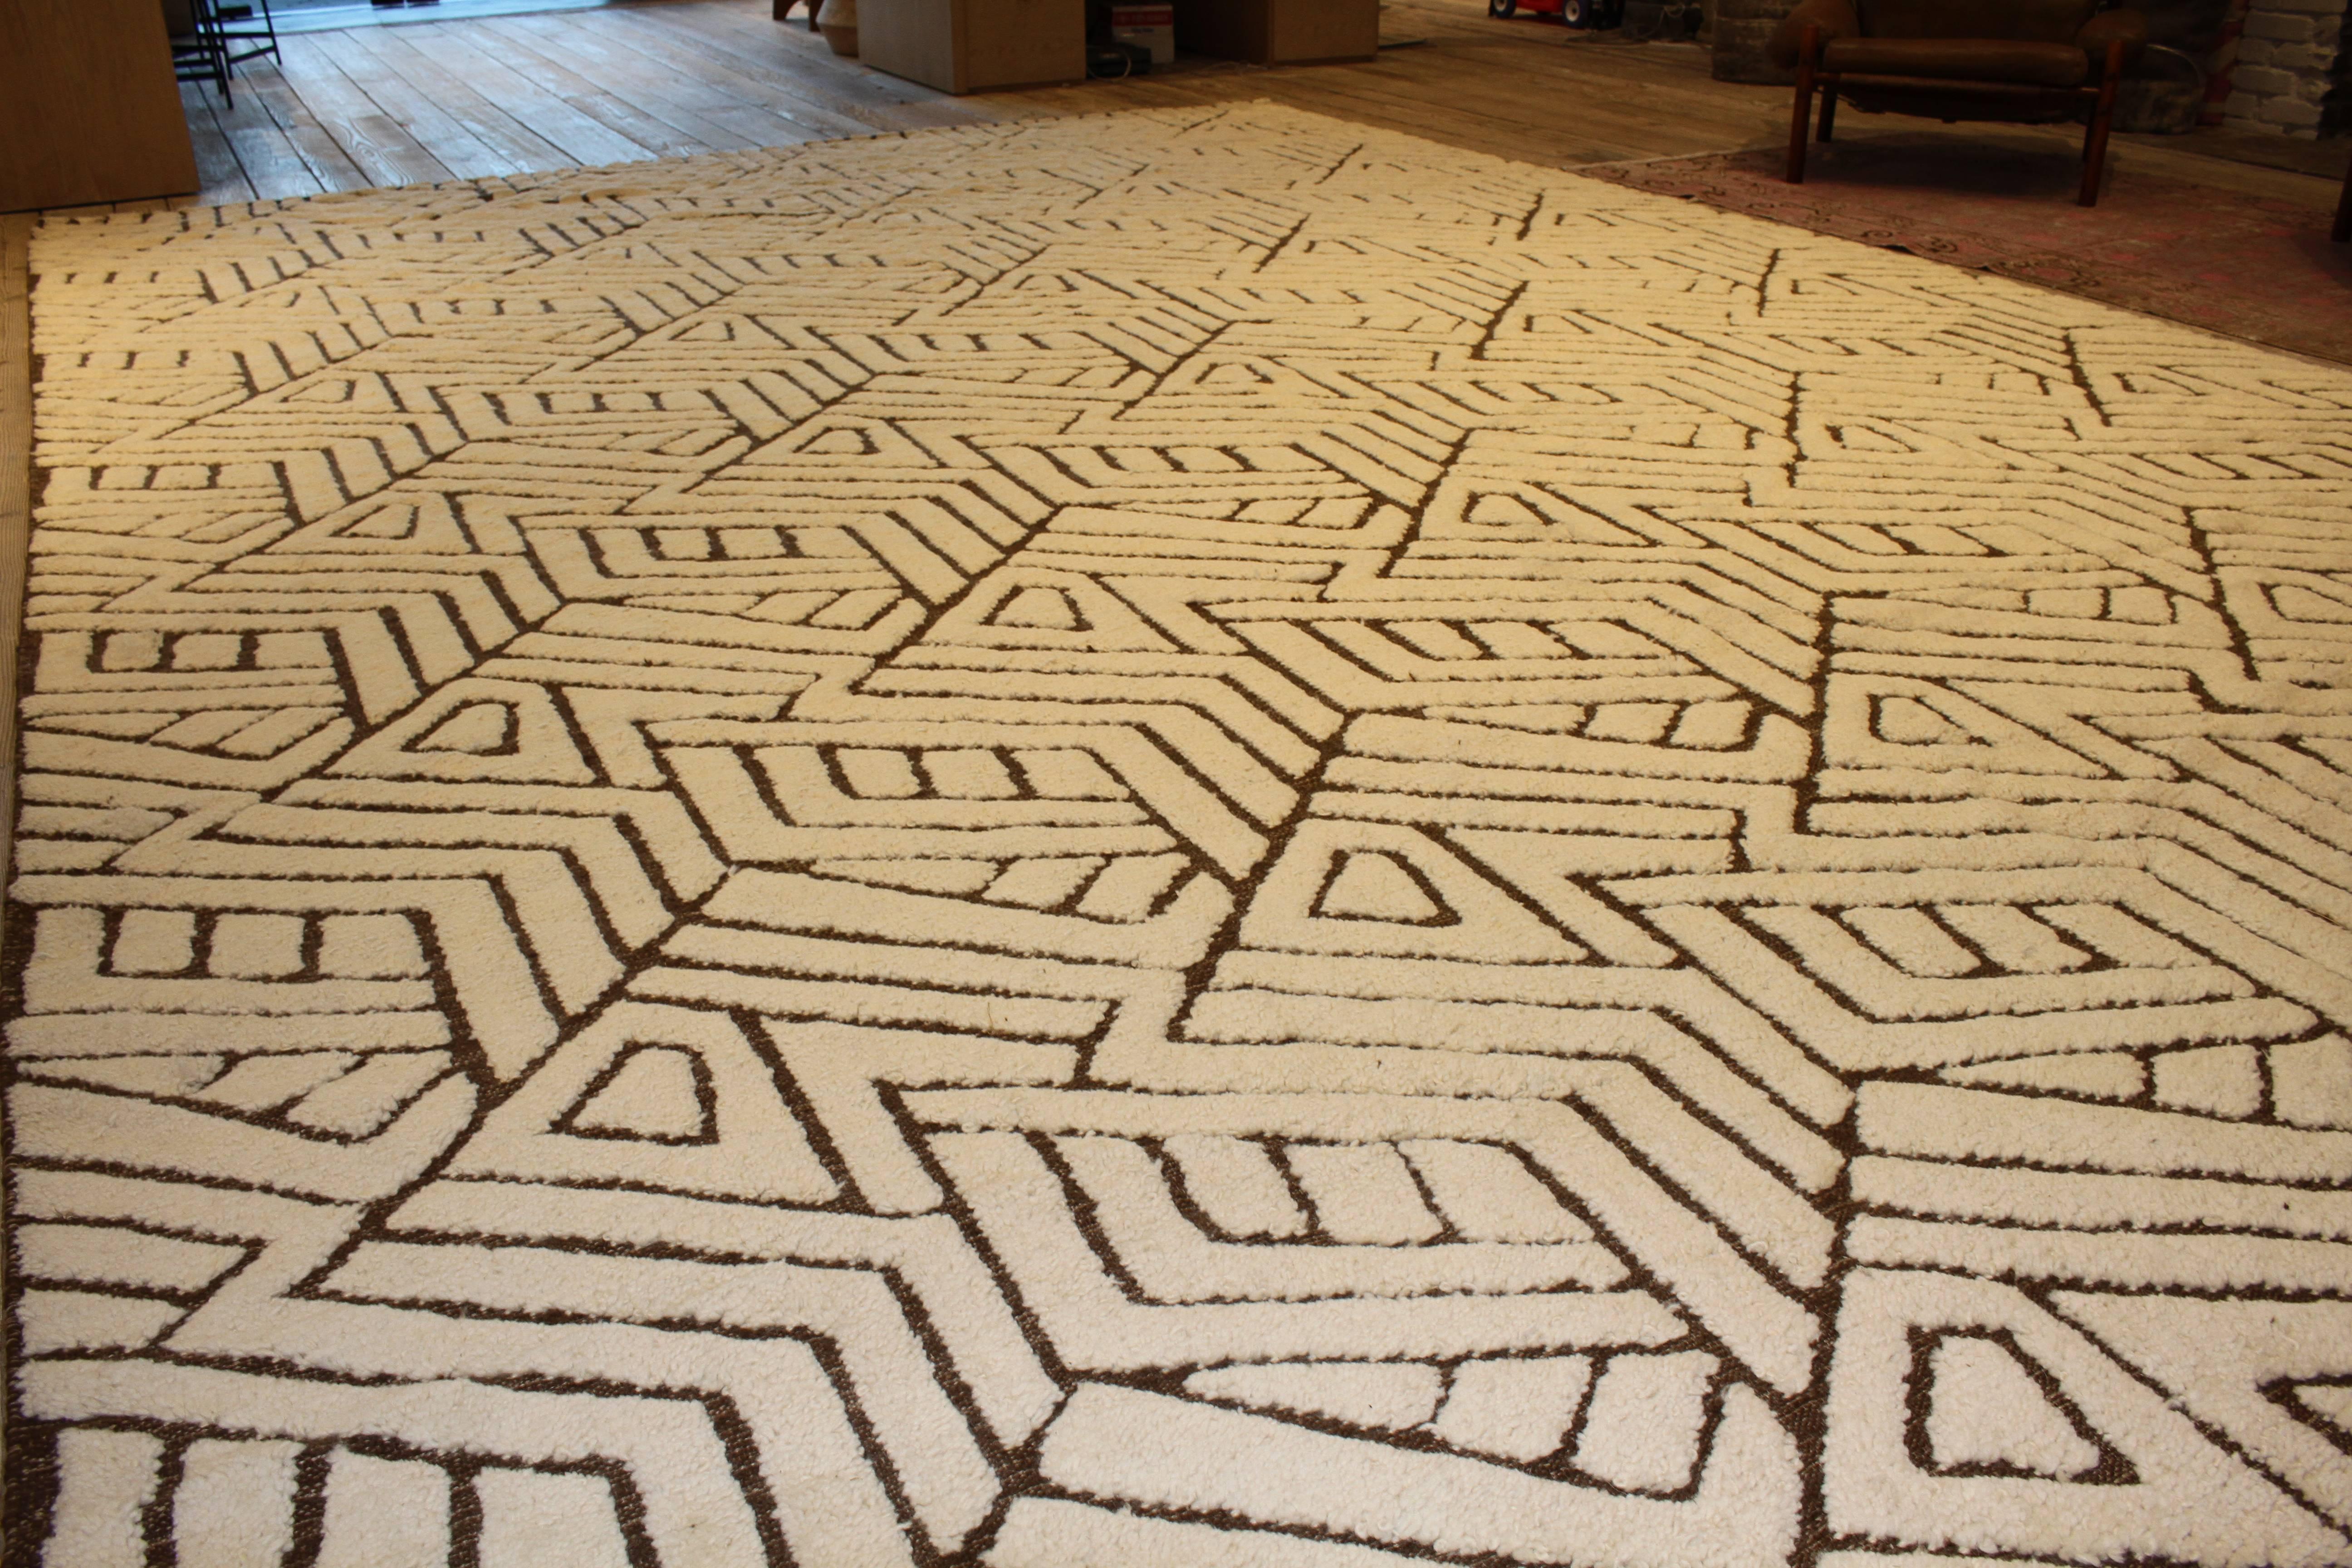 A Moroccan style rug with all-over geometric patterned design. Measures 120” x 168’.